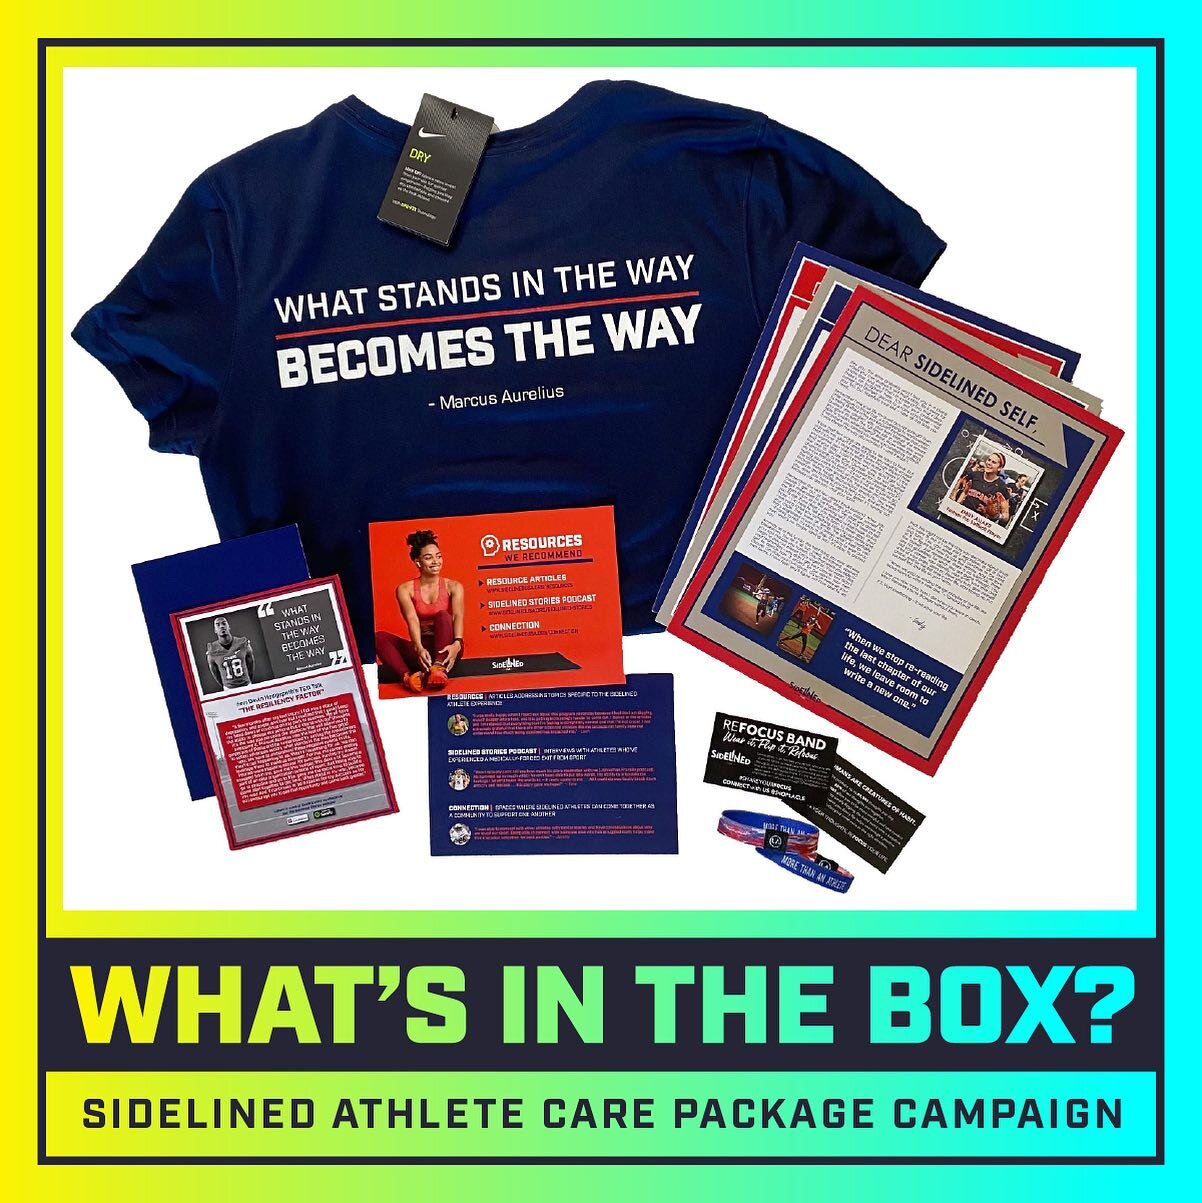 This past year we sent out 150 care packages to athletes who experienced a medically-forced exit from sport. There are still so many athletes in need of these packages, and we hope you will be able to help us make it possible to get them the resource